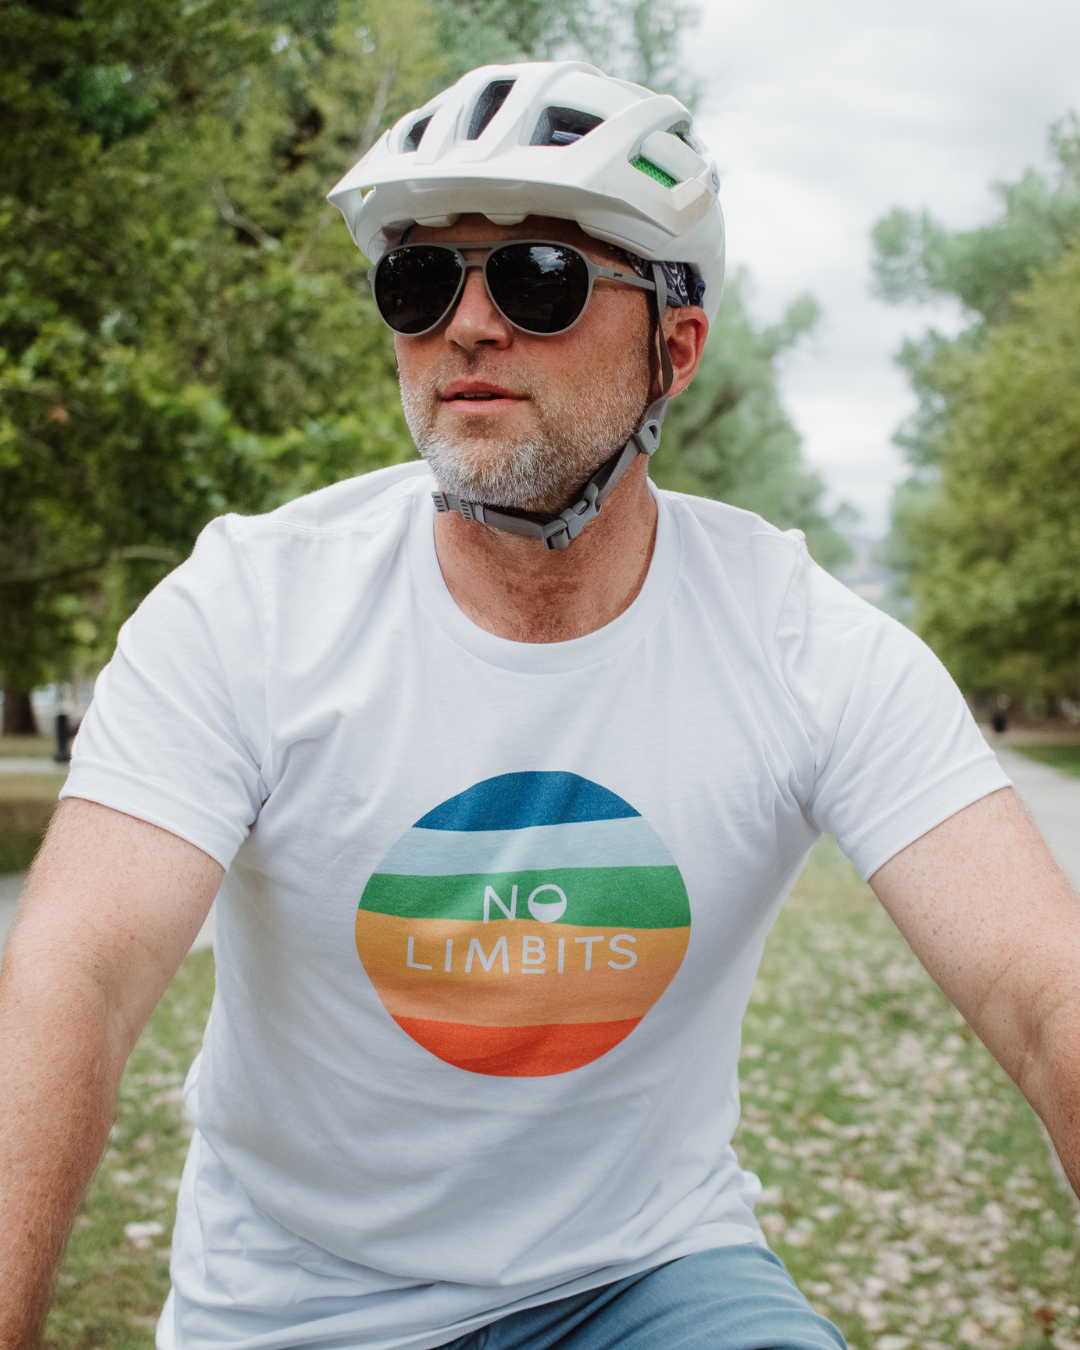 A man riding a bike wearing a white t-shirt that has a rainbow circle on it that says 'No Limbits' The man is wearing a helmet and sunglasses.